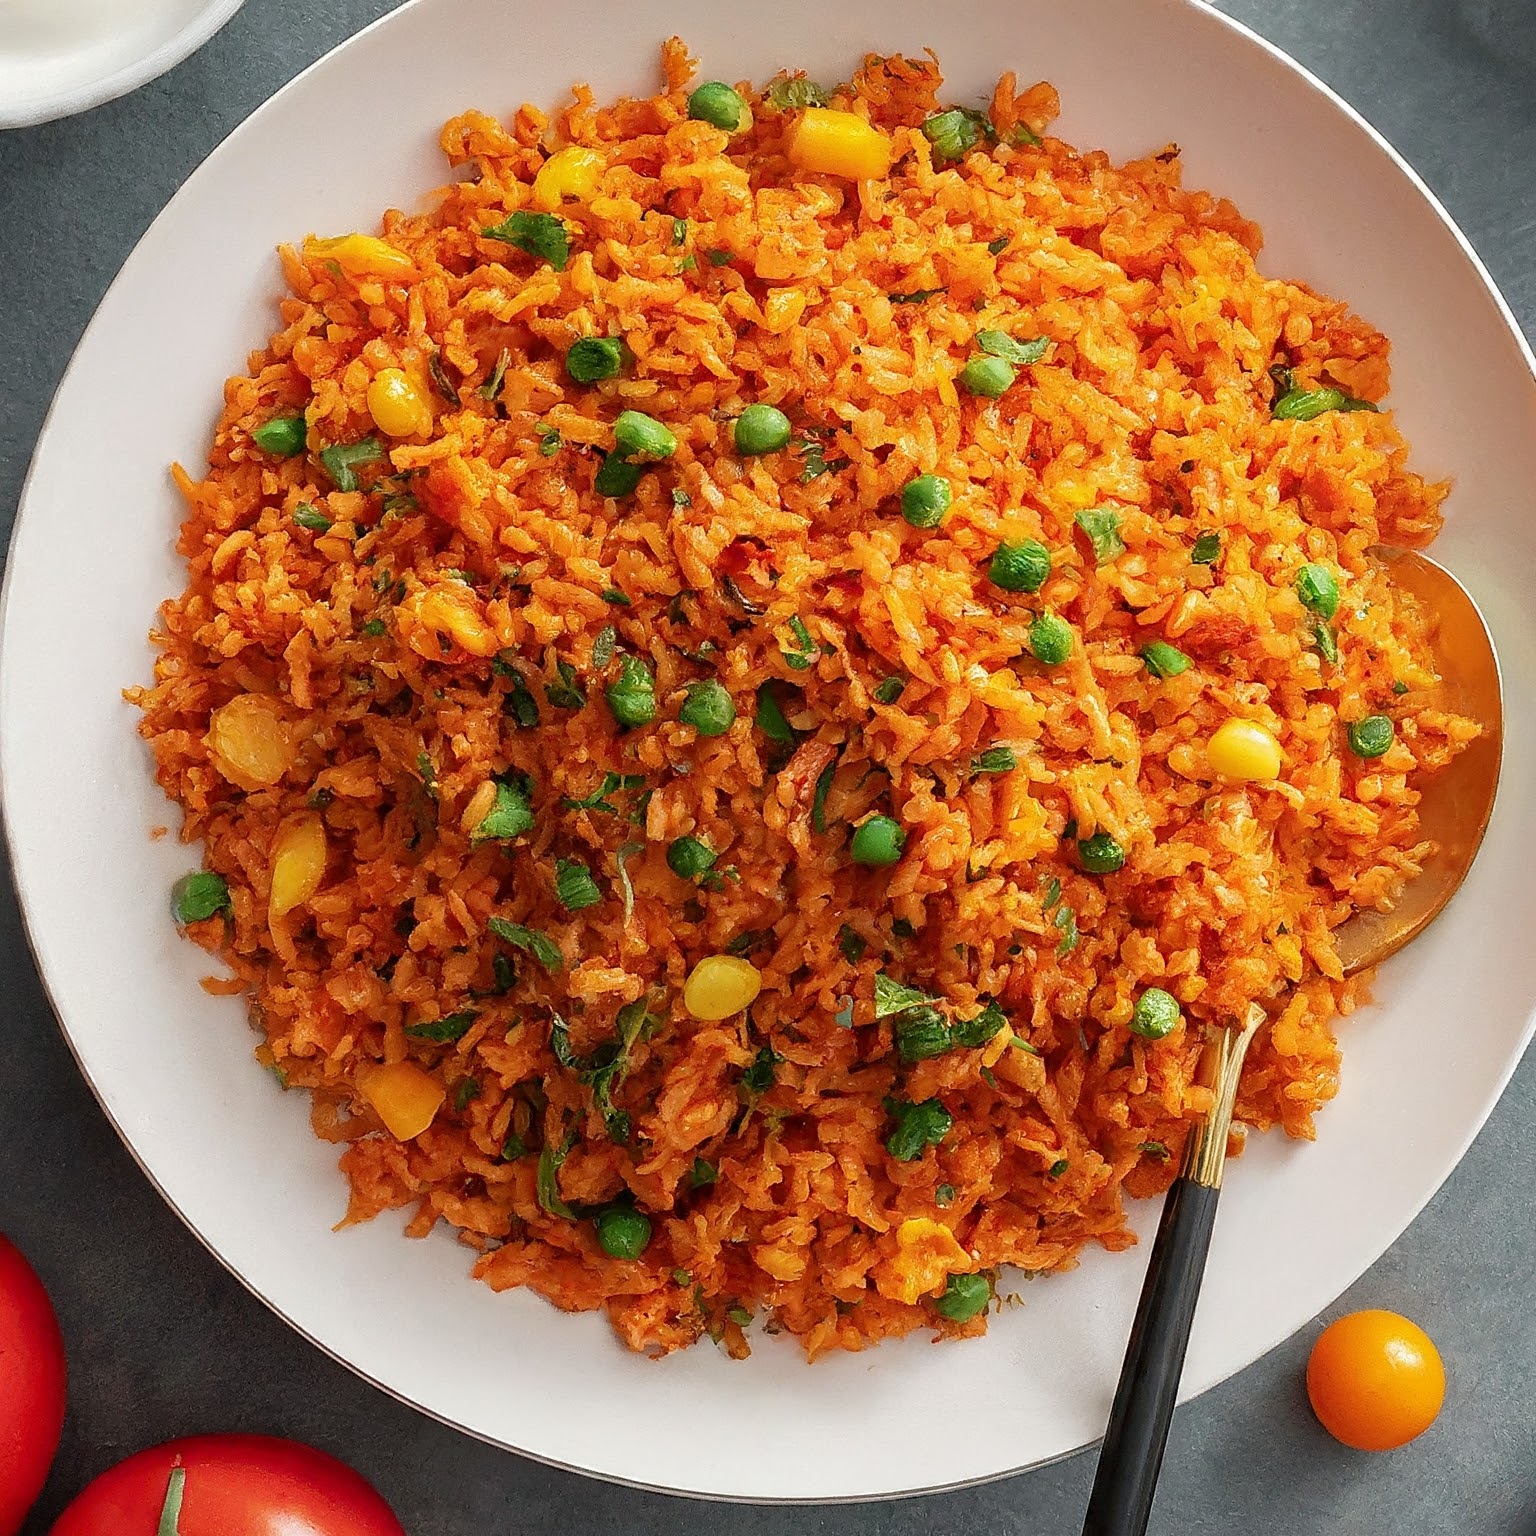 Plate of Spicy Tomato Rice with fluffy red rice, vegetables, and spices.